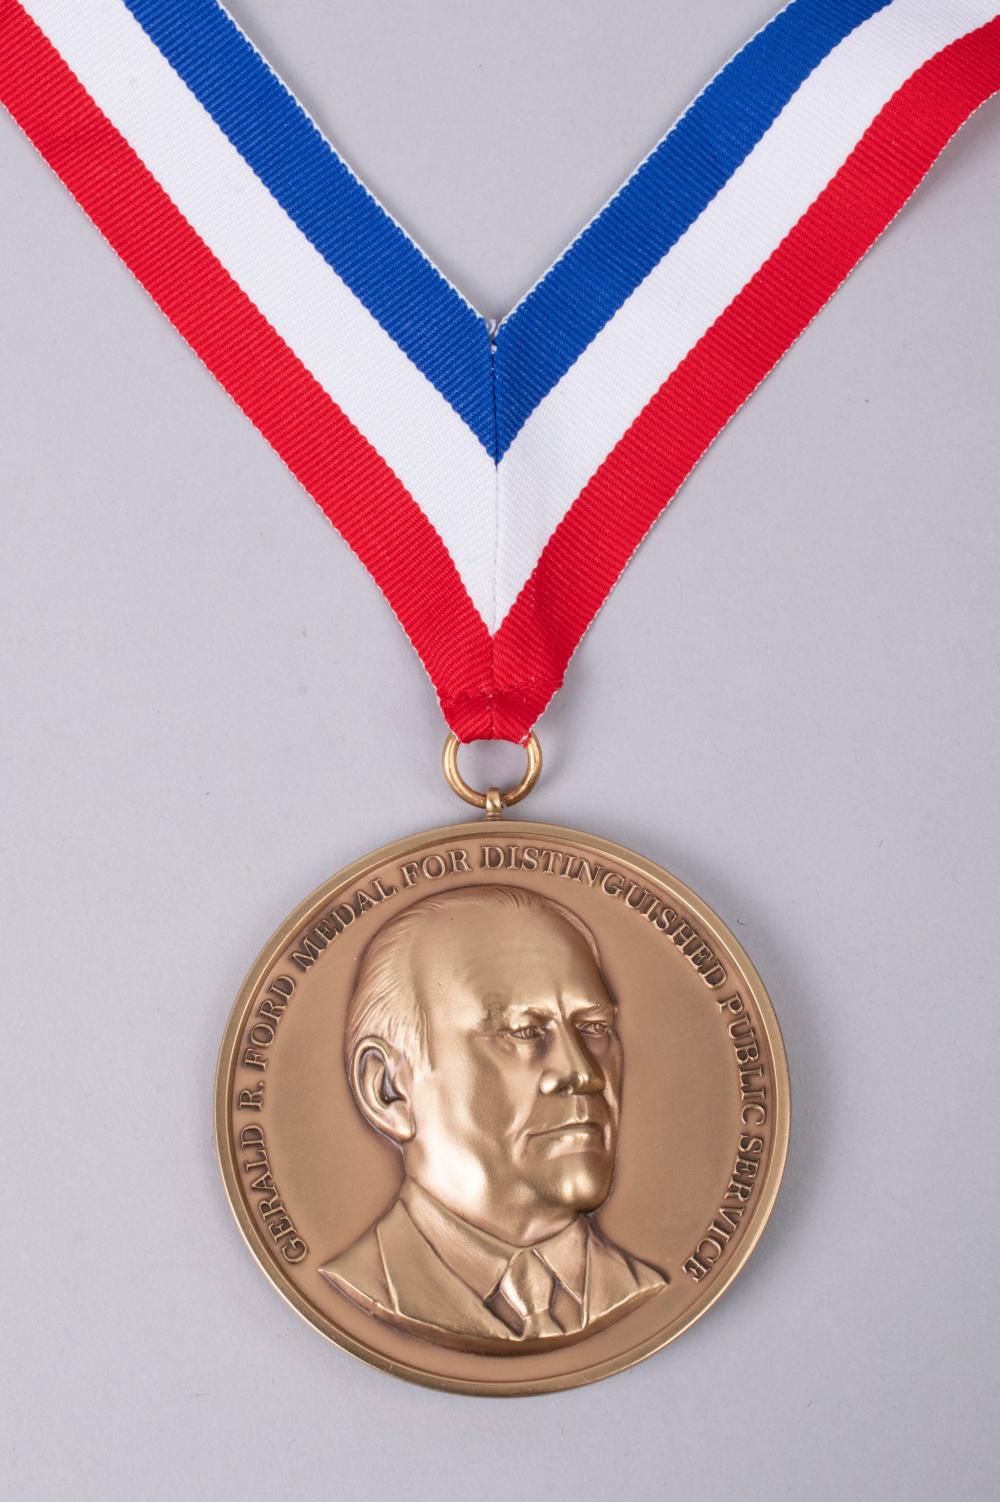 GERALD R FORD MEDAL FOR DISTINGUISHED 33cdce